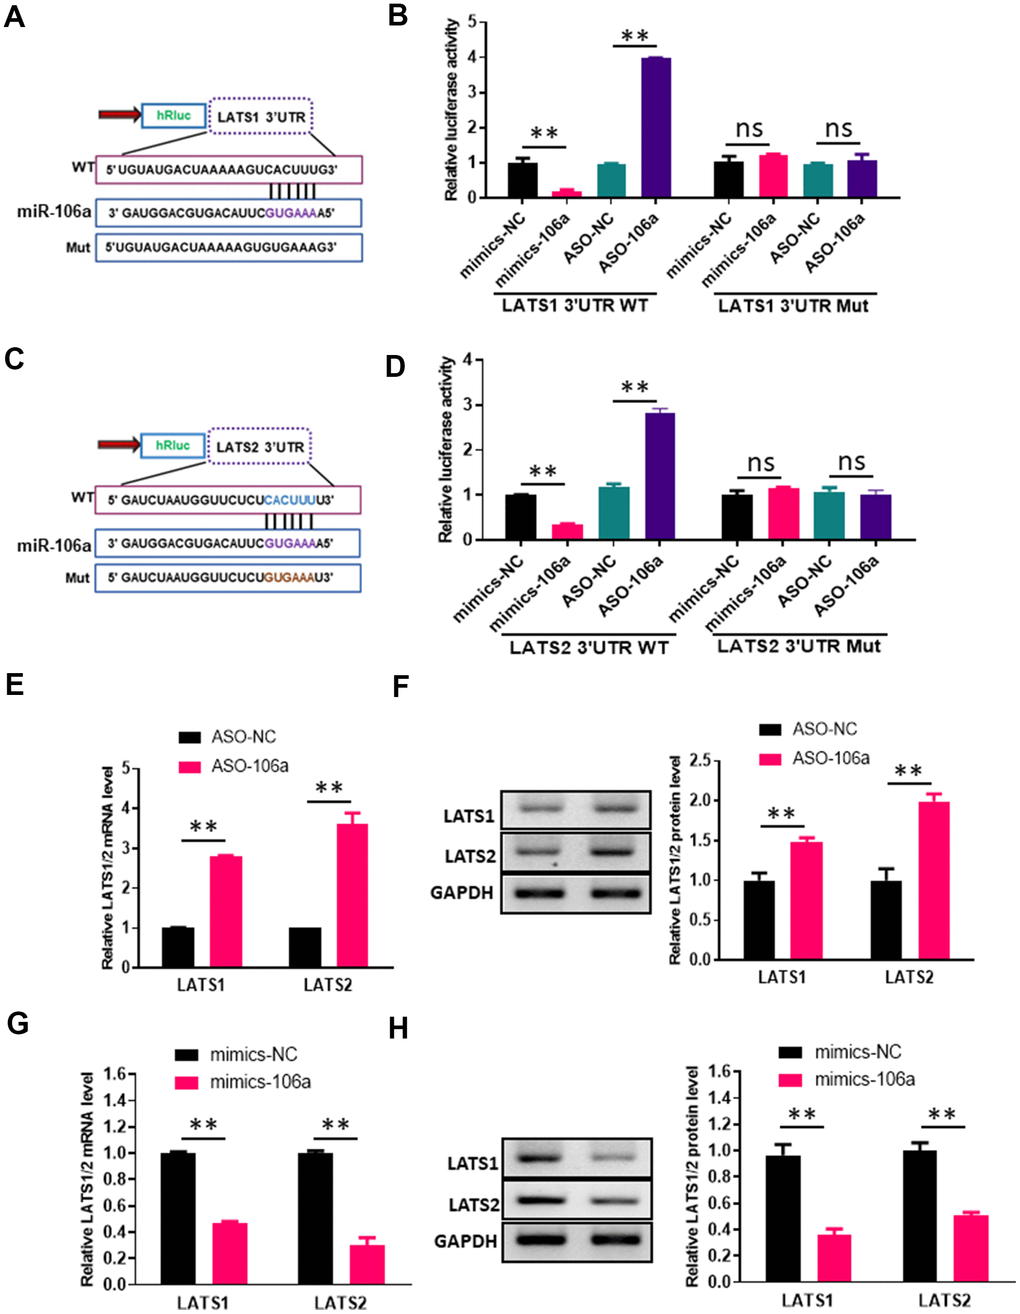 MiR-106a directly inhibits the expression of LATS1 and LATS2. (A, C) Schematic of miR-106a and target gene prediction based on the miRBase website. (B, D) Relative luciferase activities were analyzed in 293T cells transfected with the wild-type or mutant luciferase reporter vector for the LATS1 3'UTR (B) or the LATS2 3'UTR (D) and co-transfected with mimics-106a, mimics-NC, ASO-106a or ASO-NC. (E, G) LATS1 and LATS2 mRNA levels were analyzed via qRT-PCR in HUVECs transfected with ASO-106a or ASO-NC (E) and HCMECs transfected with mimics-106a or mimics-NC (G). (F, H) LATS1 and LATS2 protein levels were assessed using Western blotting in HUVECs transfected with ASO-106a or ASO-NC (F) and HCMECs transfected with mimics-106a or mimics-NC (H).